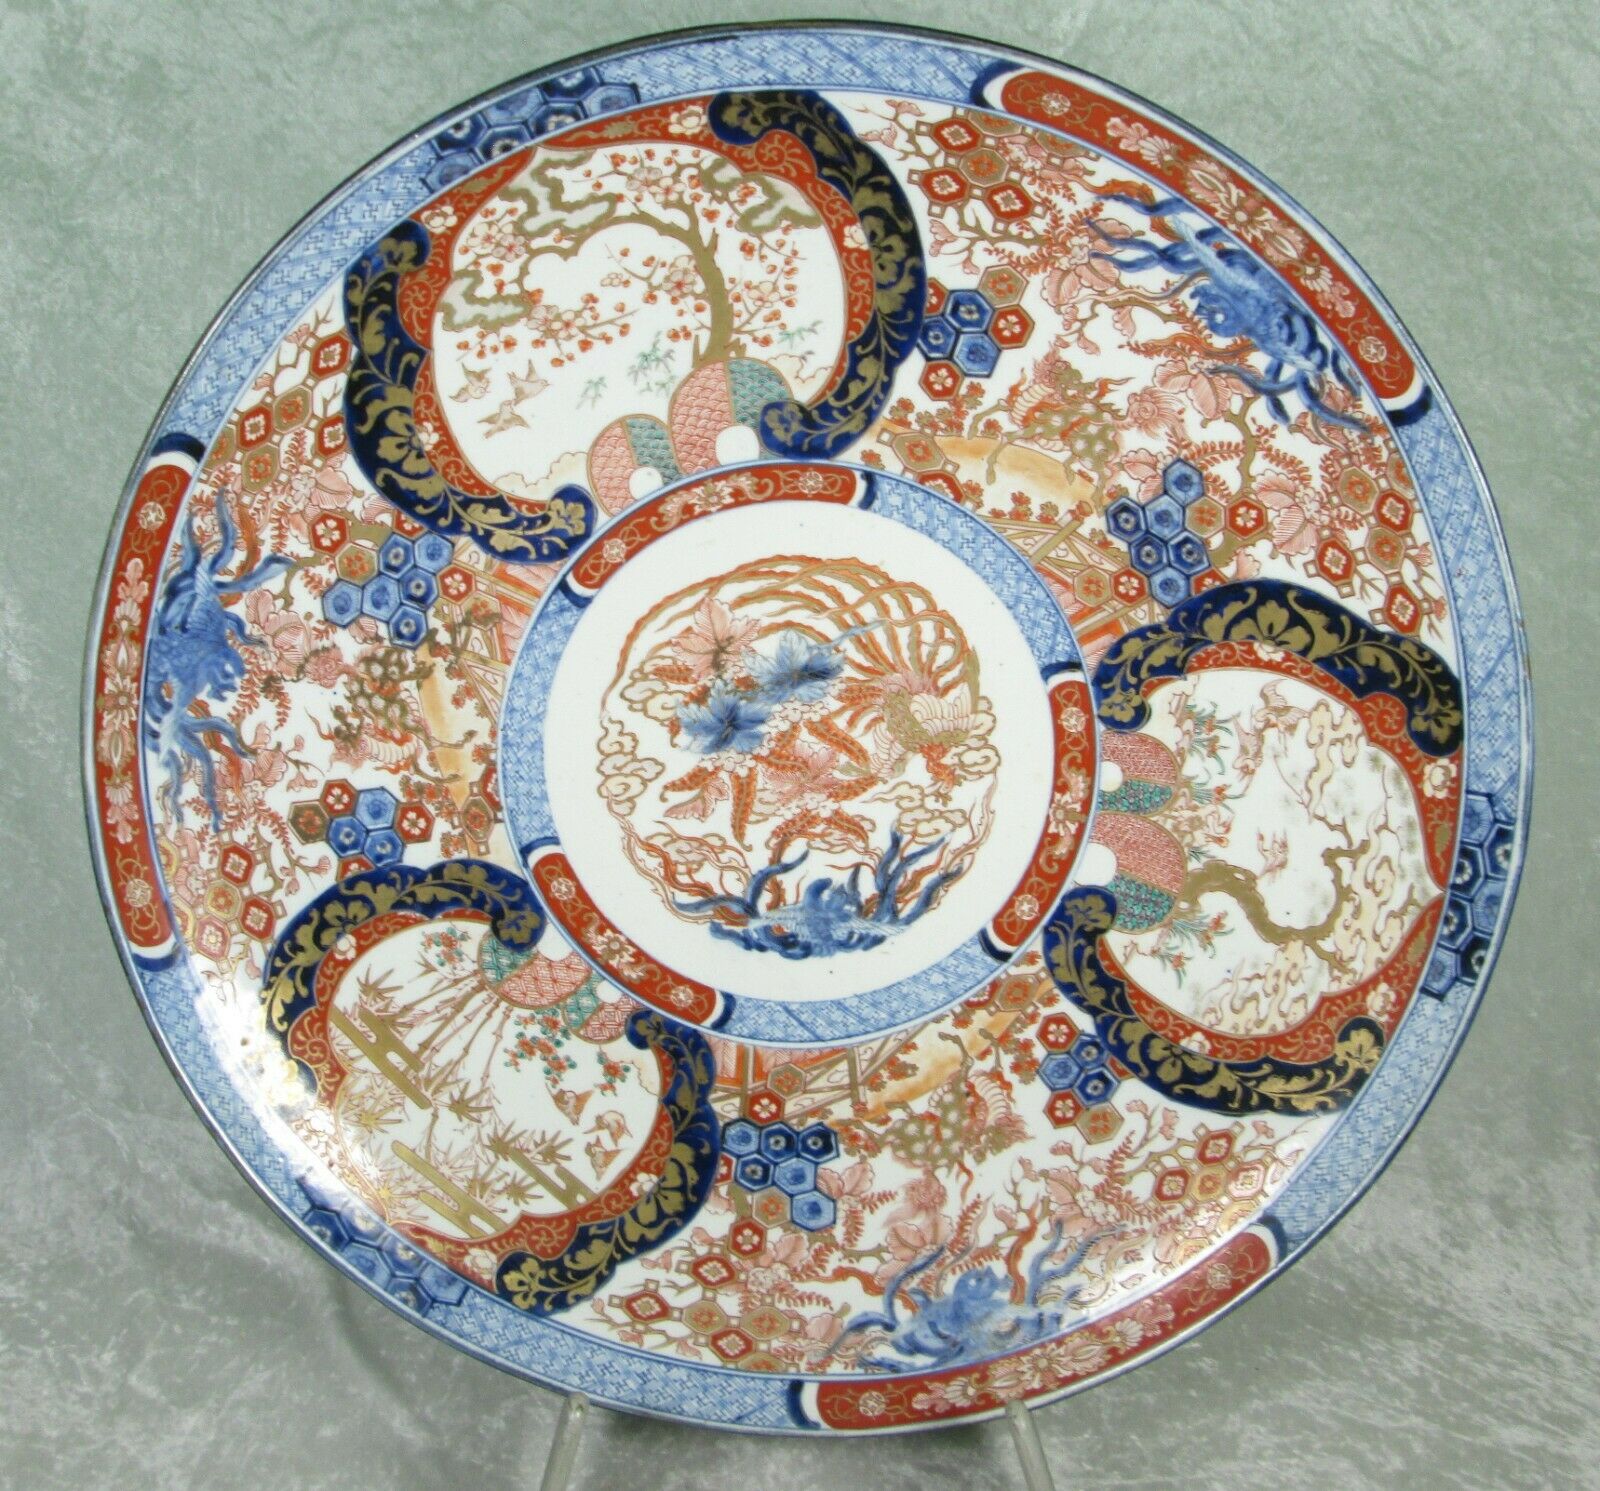 Antique Japanese Imari Charger Plate 24-1/2 inch Diameter Red Blue Cherry Trees